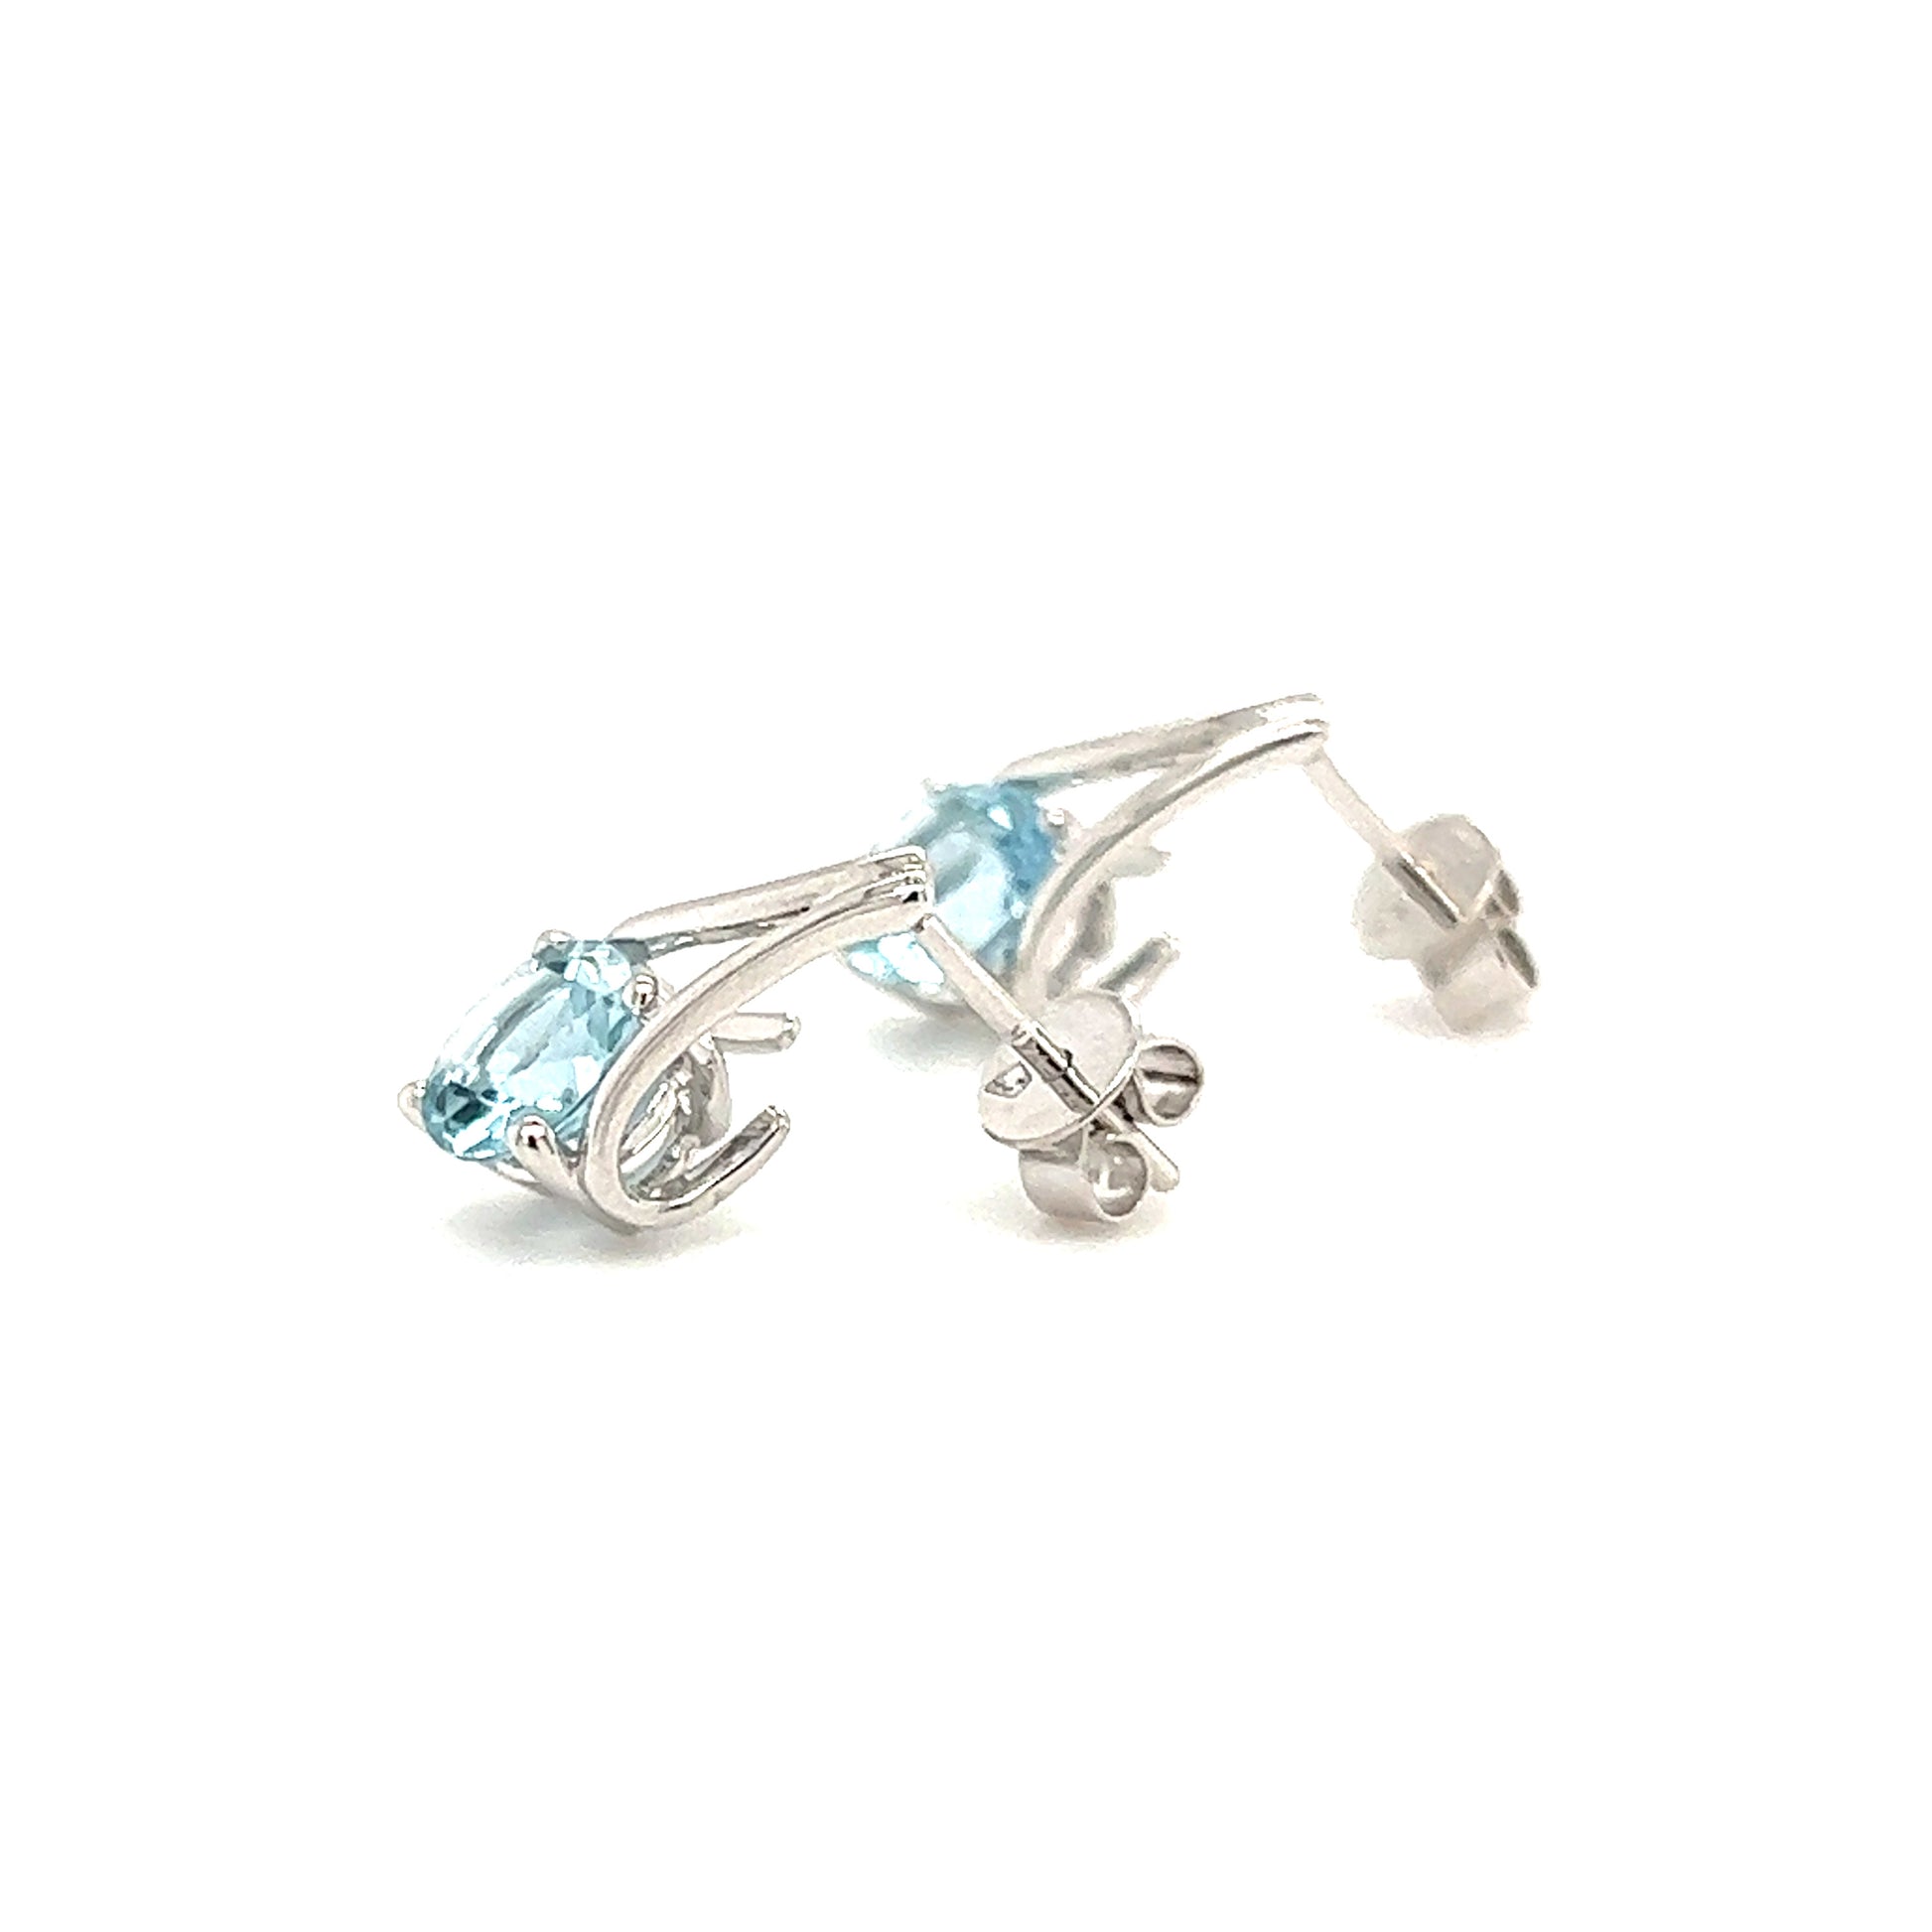 Round Aquamarine Earrings with V-Shaped Bars in 14K White Gold Profile View